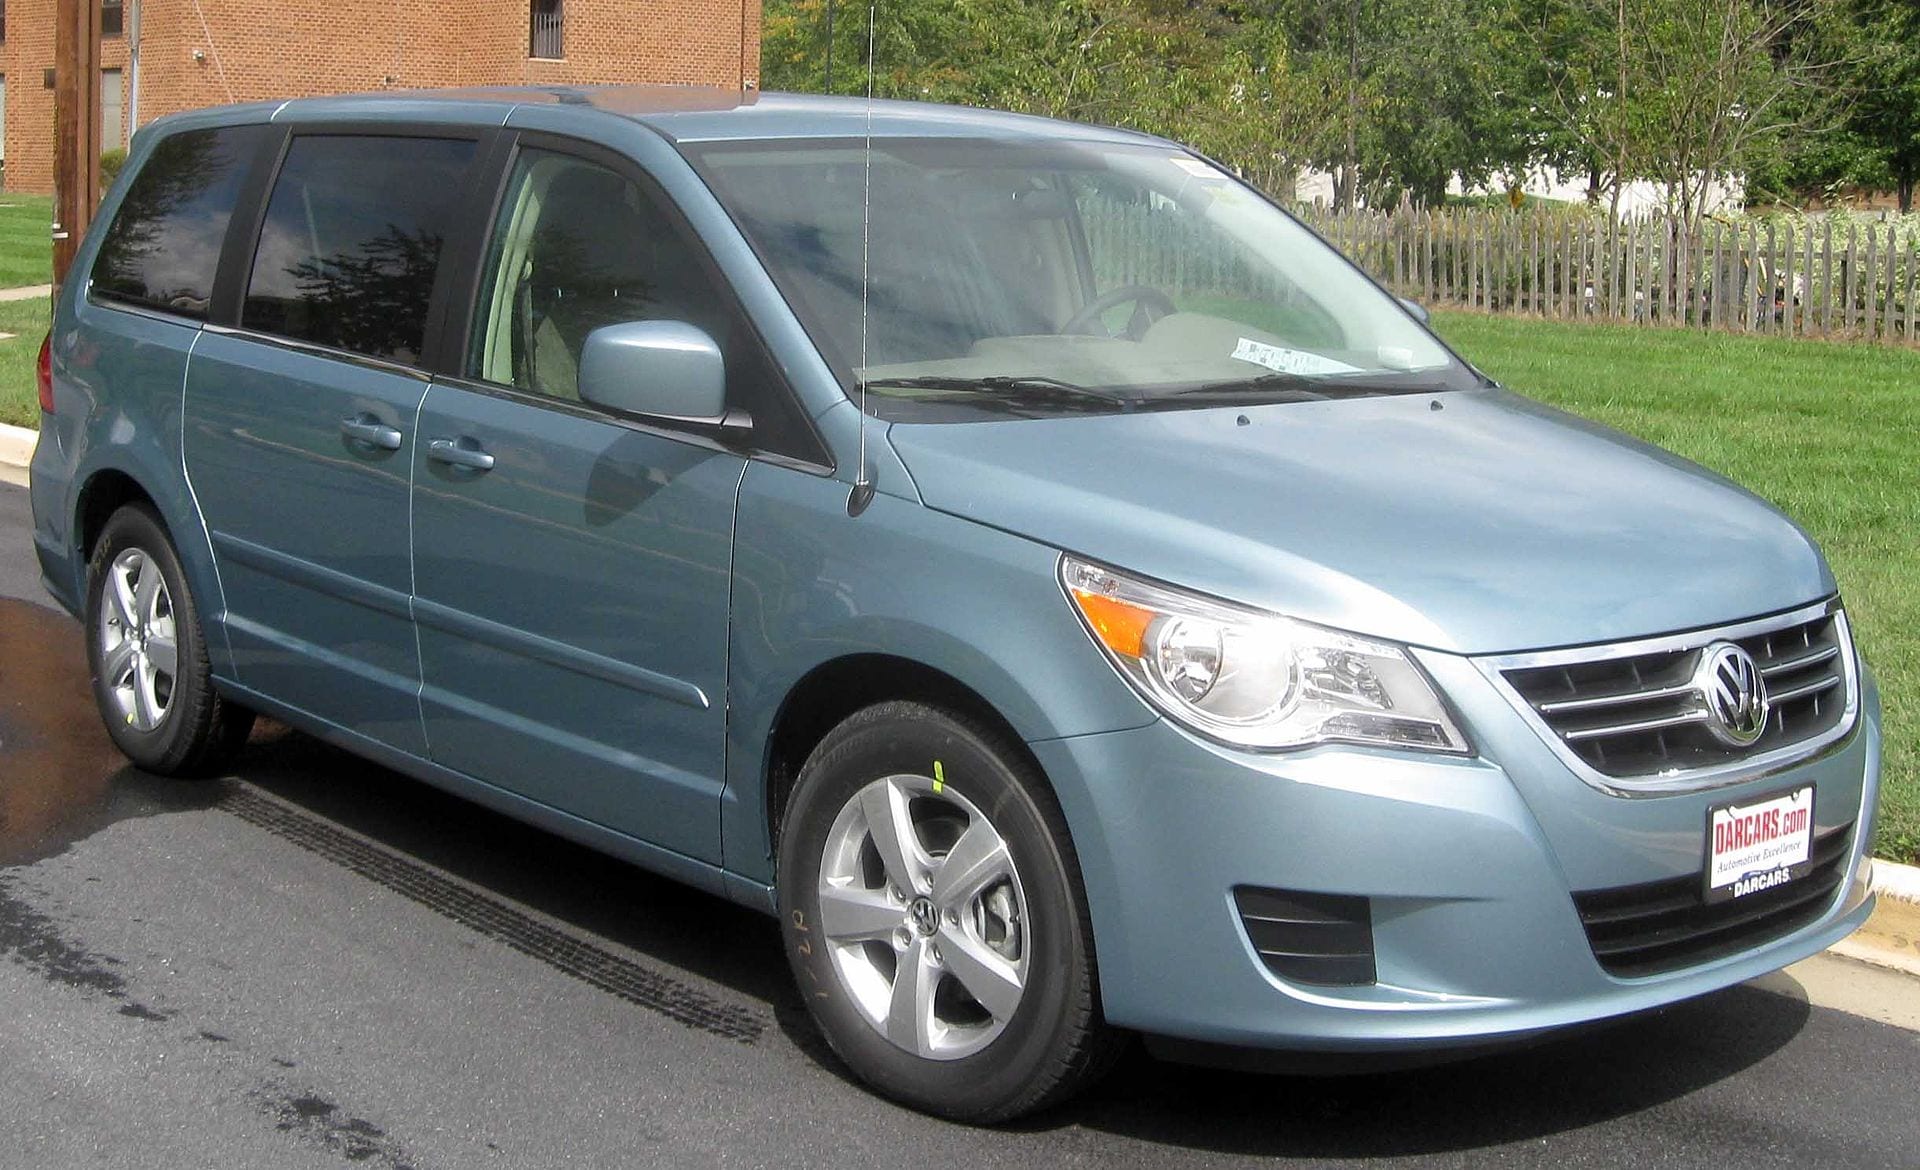 Most Affordable Used Minivans Under $20,000